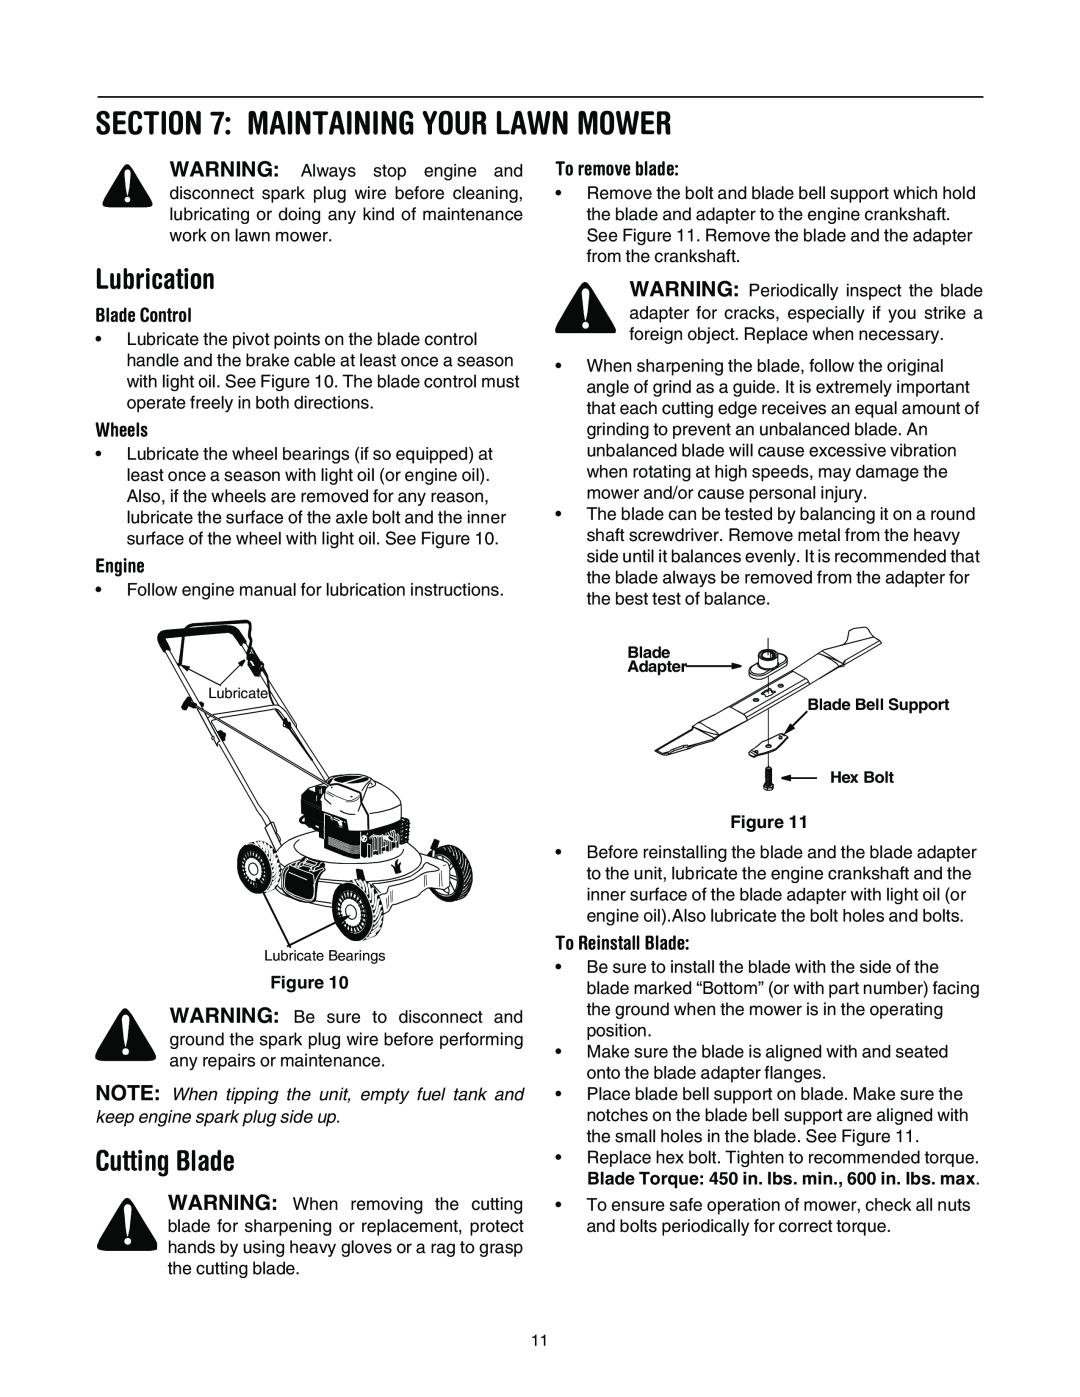 Yard-Man 107 manual Maintaining Your Lawn Mower, Lubrication, Cutting Blade, To remove blade, Blade Control, Wheels, Engine 